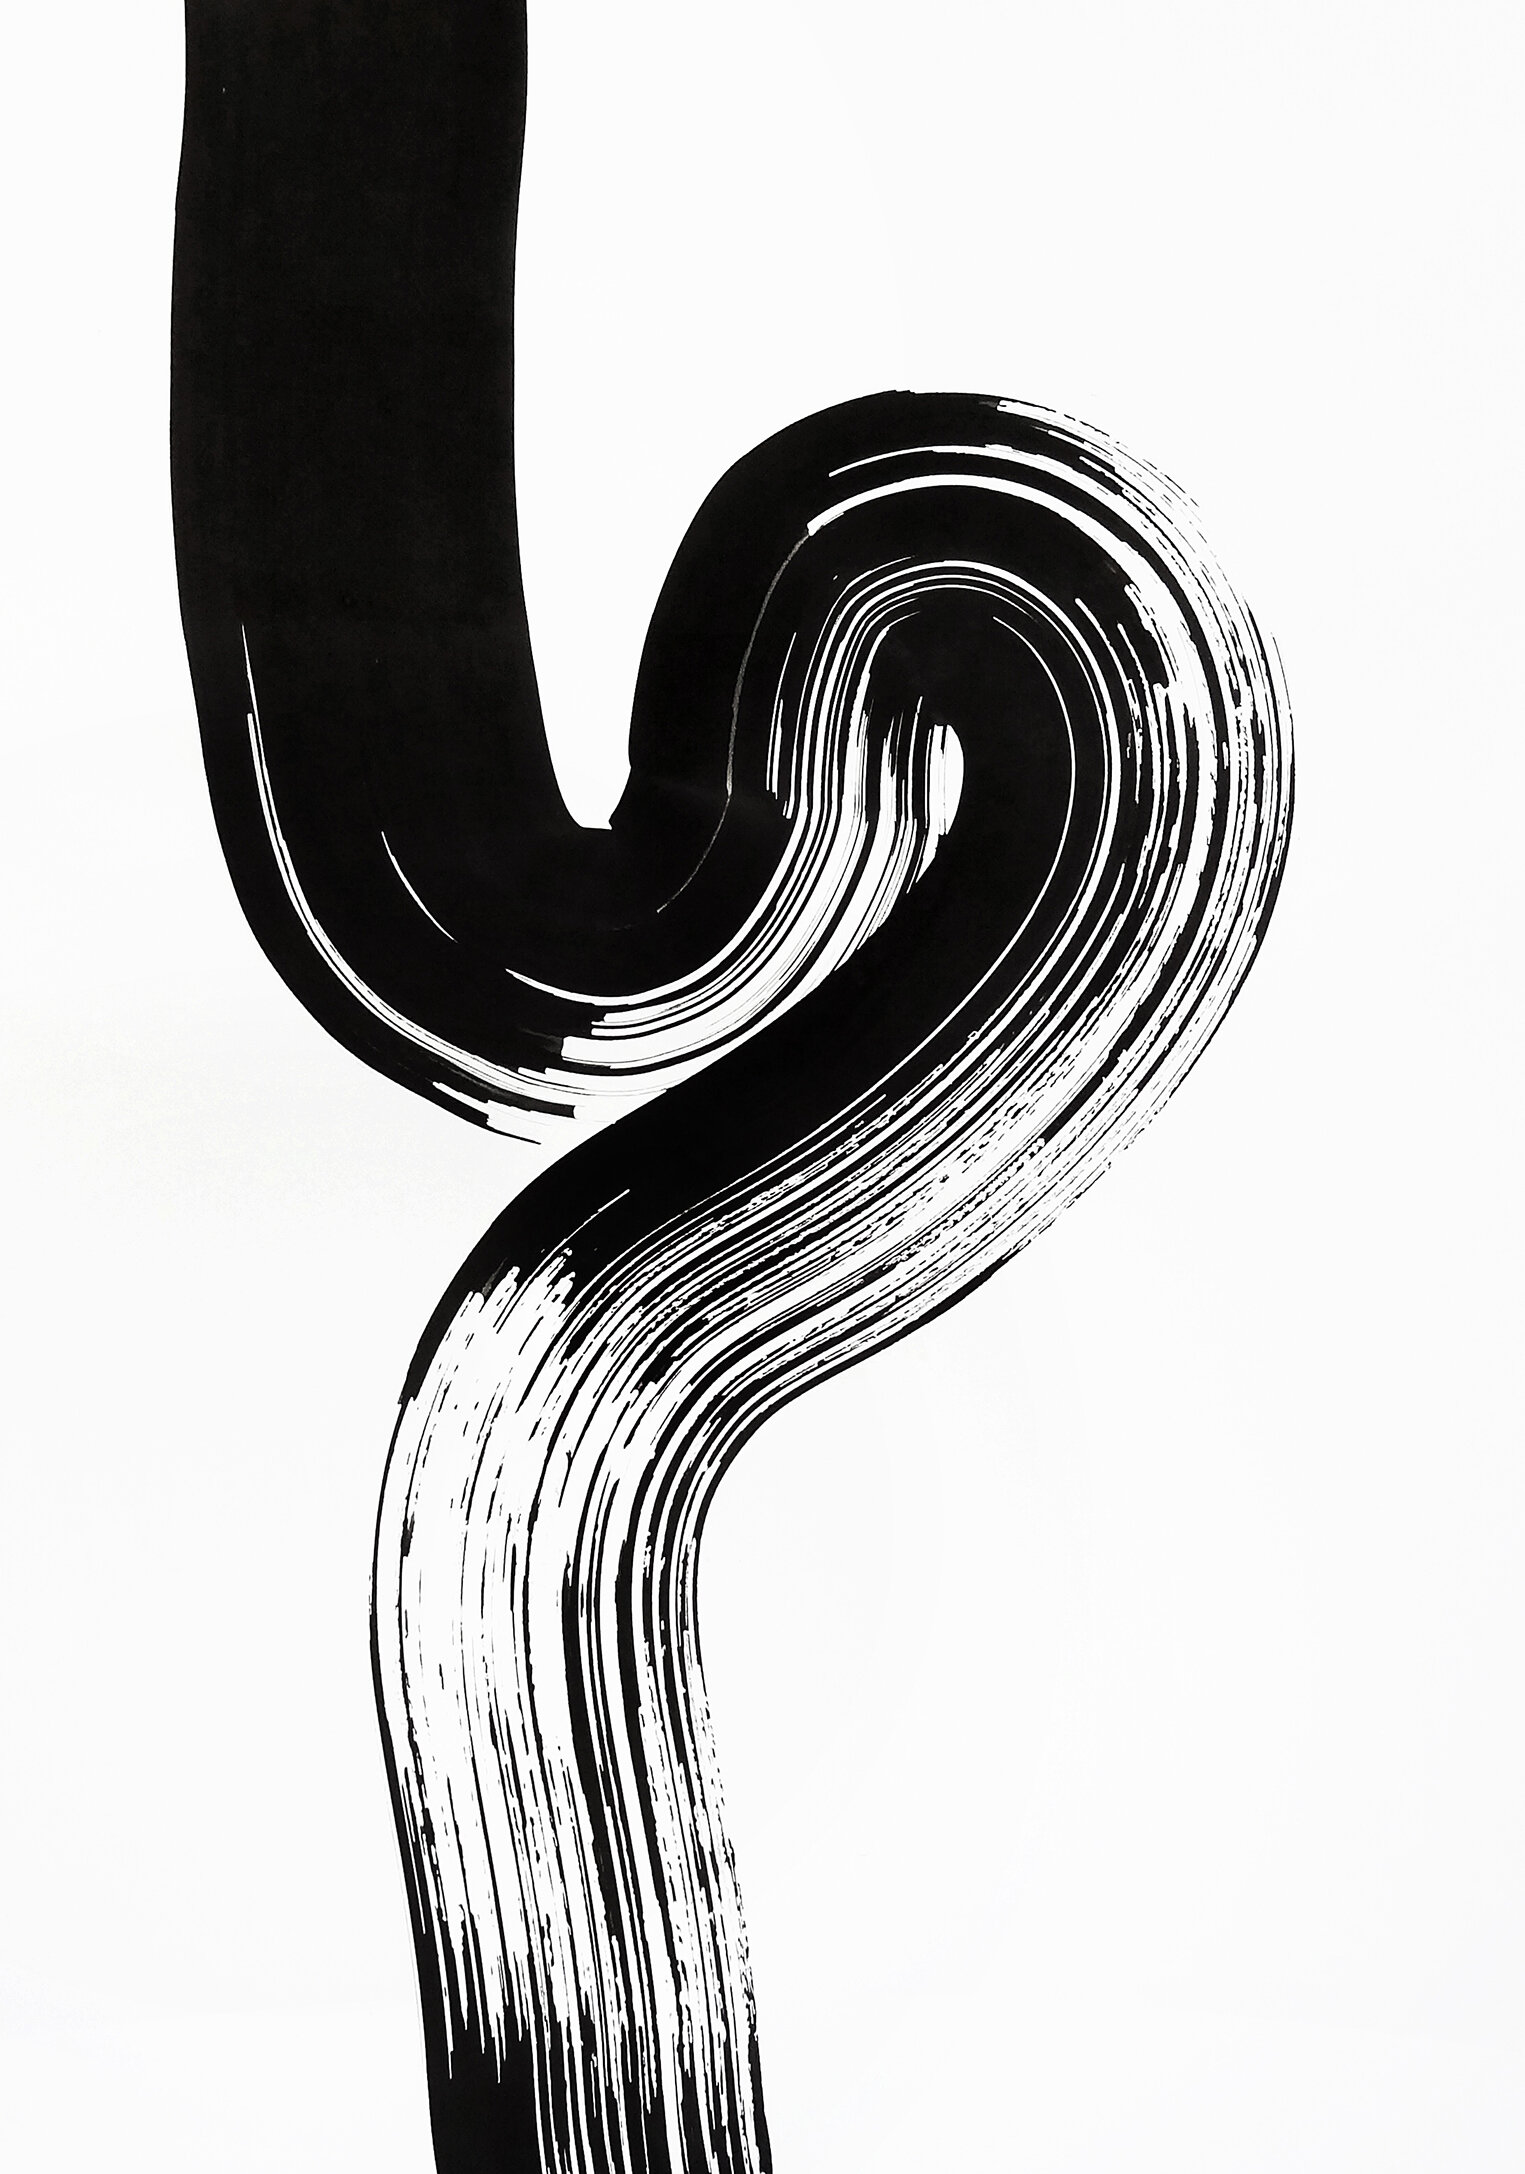  Untitled, 2020 strokes series calligraphy ink on paper 42,0 x 29,7 cm (10-20) 